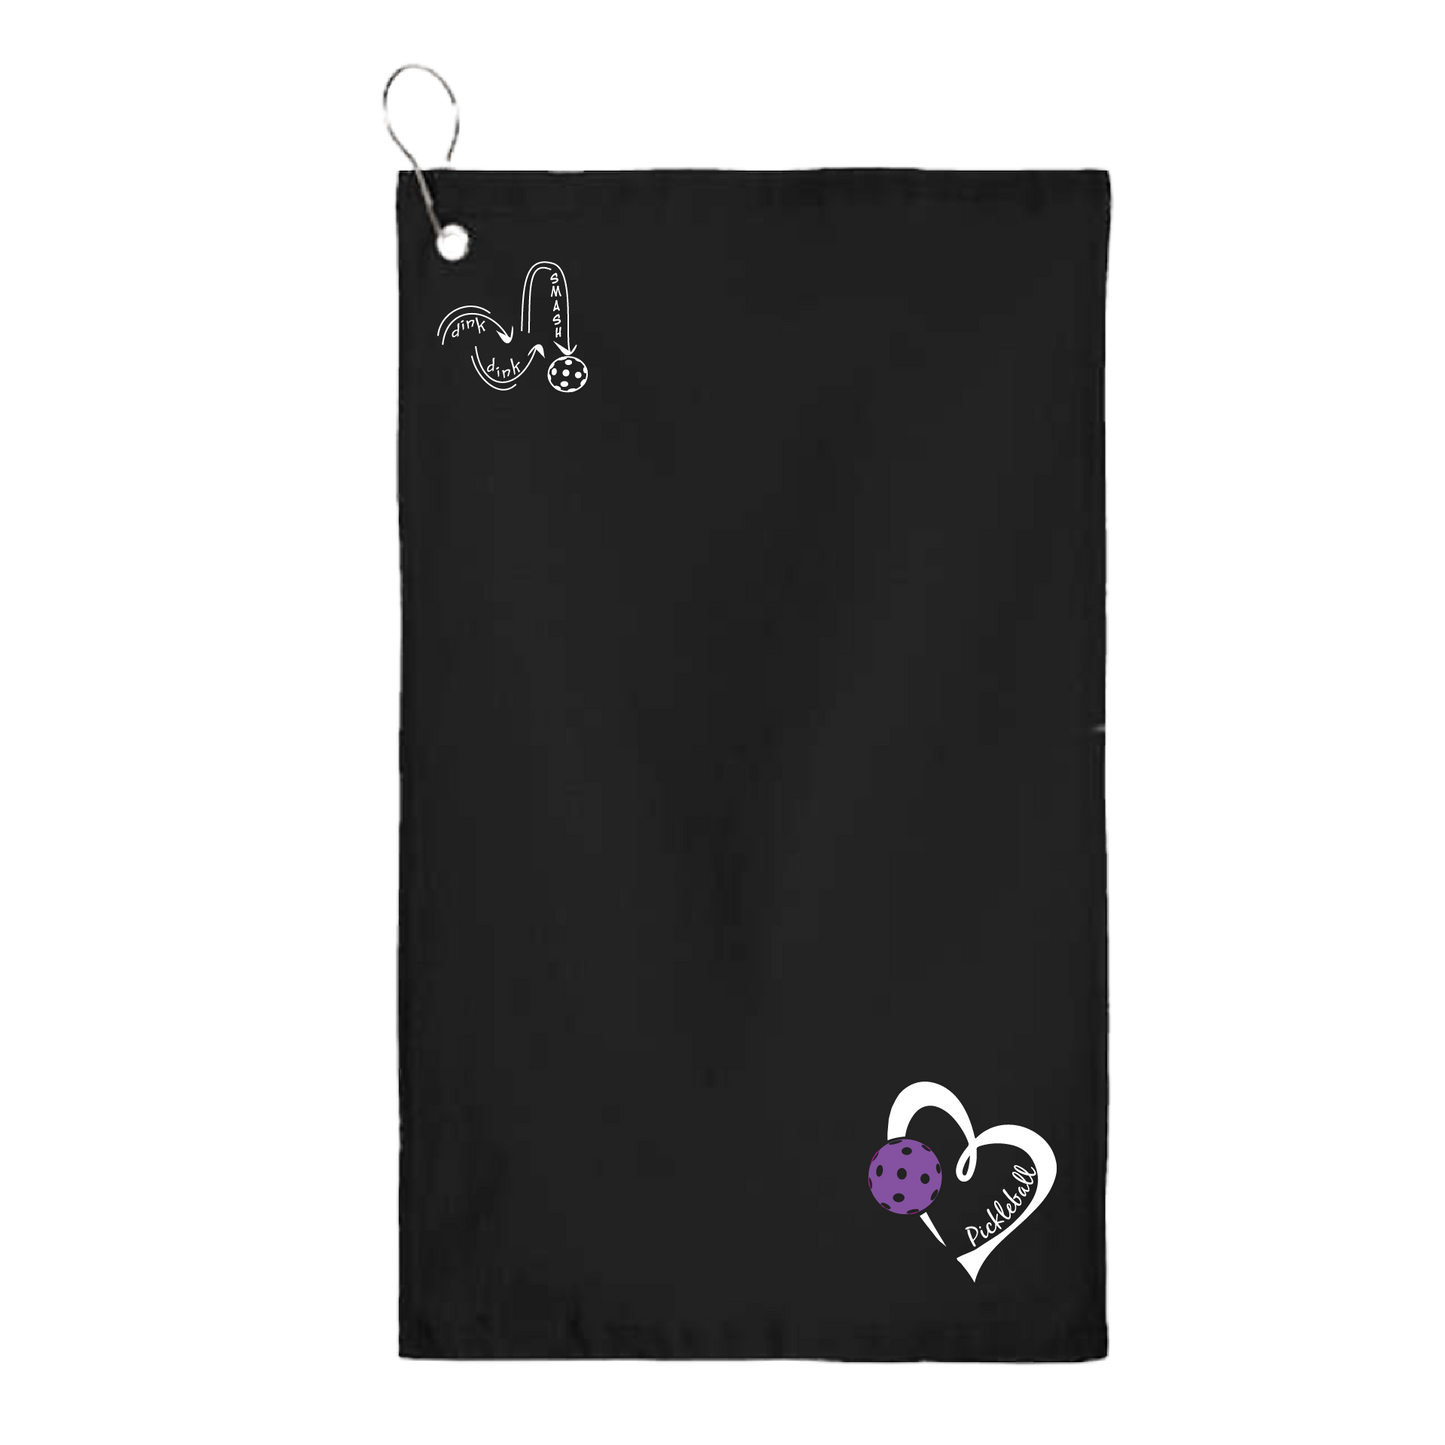 This Pickleball Love Heart and Purple Pickleball towel is crafted with cotton terry velour for optimal performance. It features grommets, hooks, and hemmed edges for added durability. It's perfect for completing your pickleball gear, and an ideal gift for friends and tournaments. The towel is designed to be both absorbent and lightweight, so you can remain dry and comfortable while you play